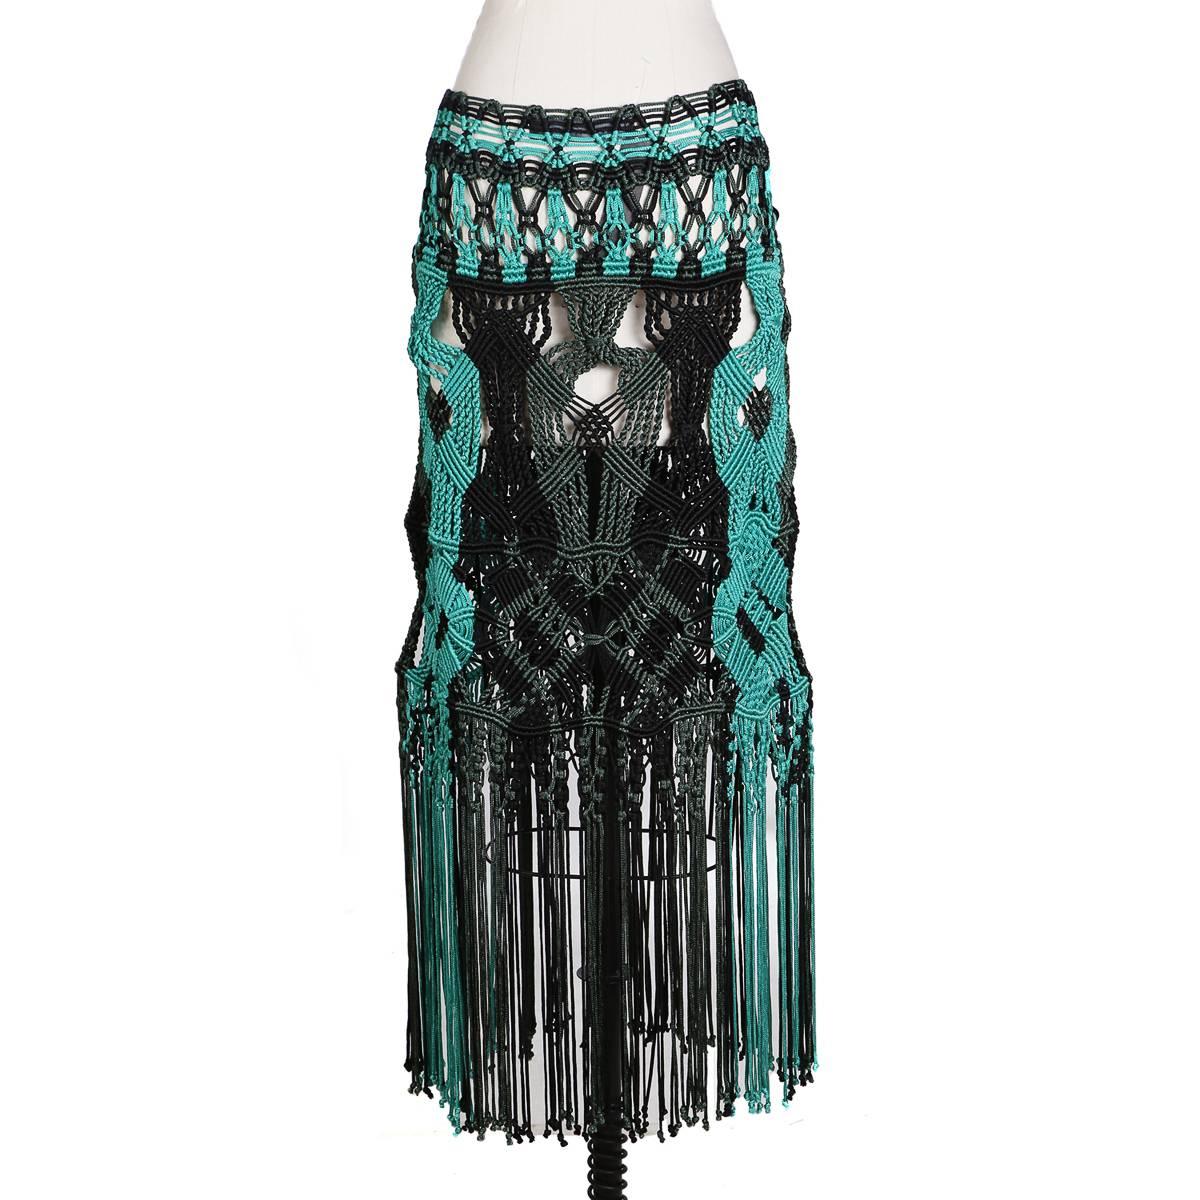 This is a skirt from Proenza Schouler.  Crochet knit with fringe and side hook and eye closures.